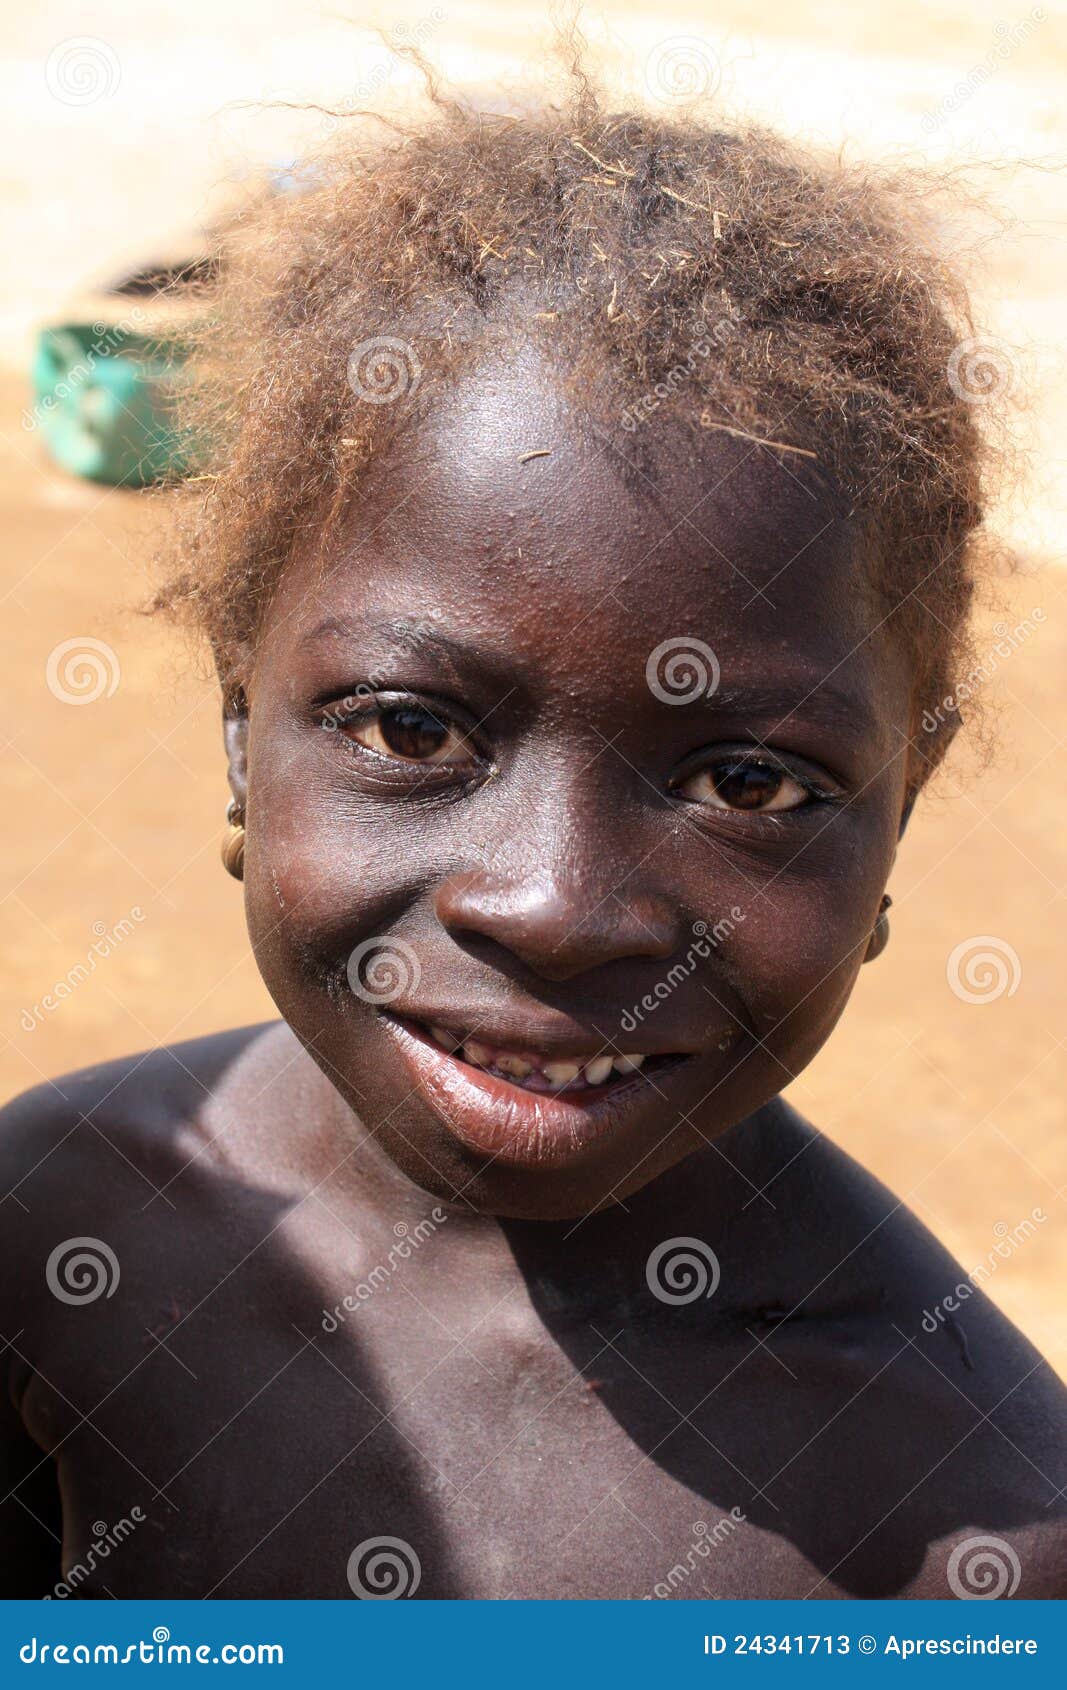 African girl editorial stock photo. Image of backpacked - 24341713